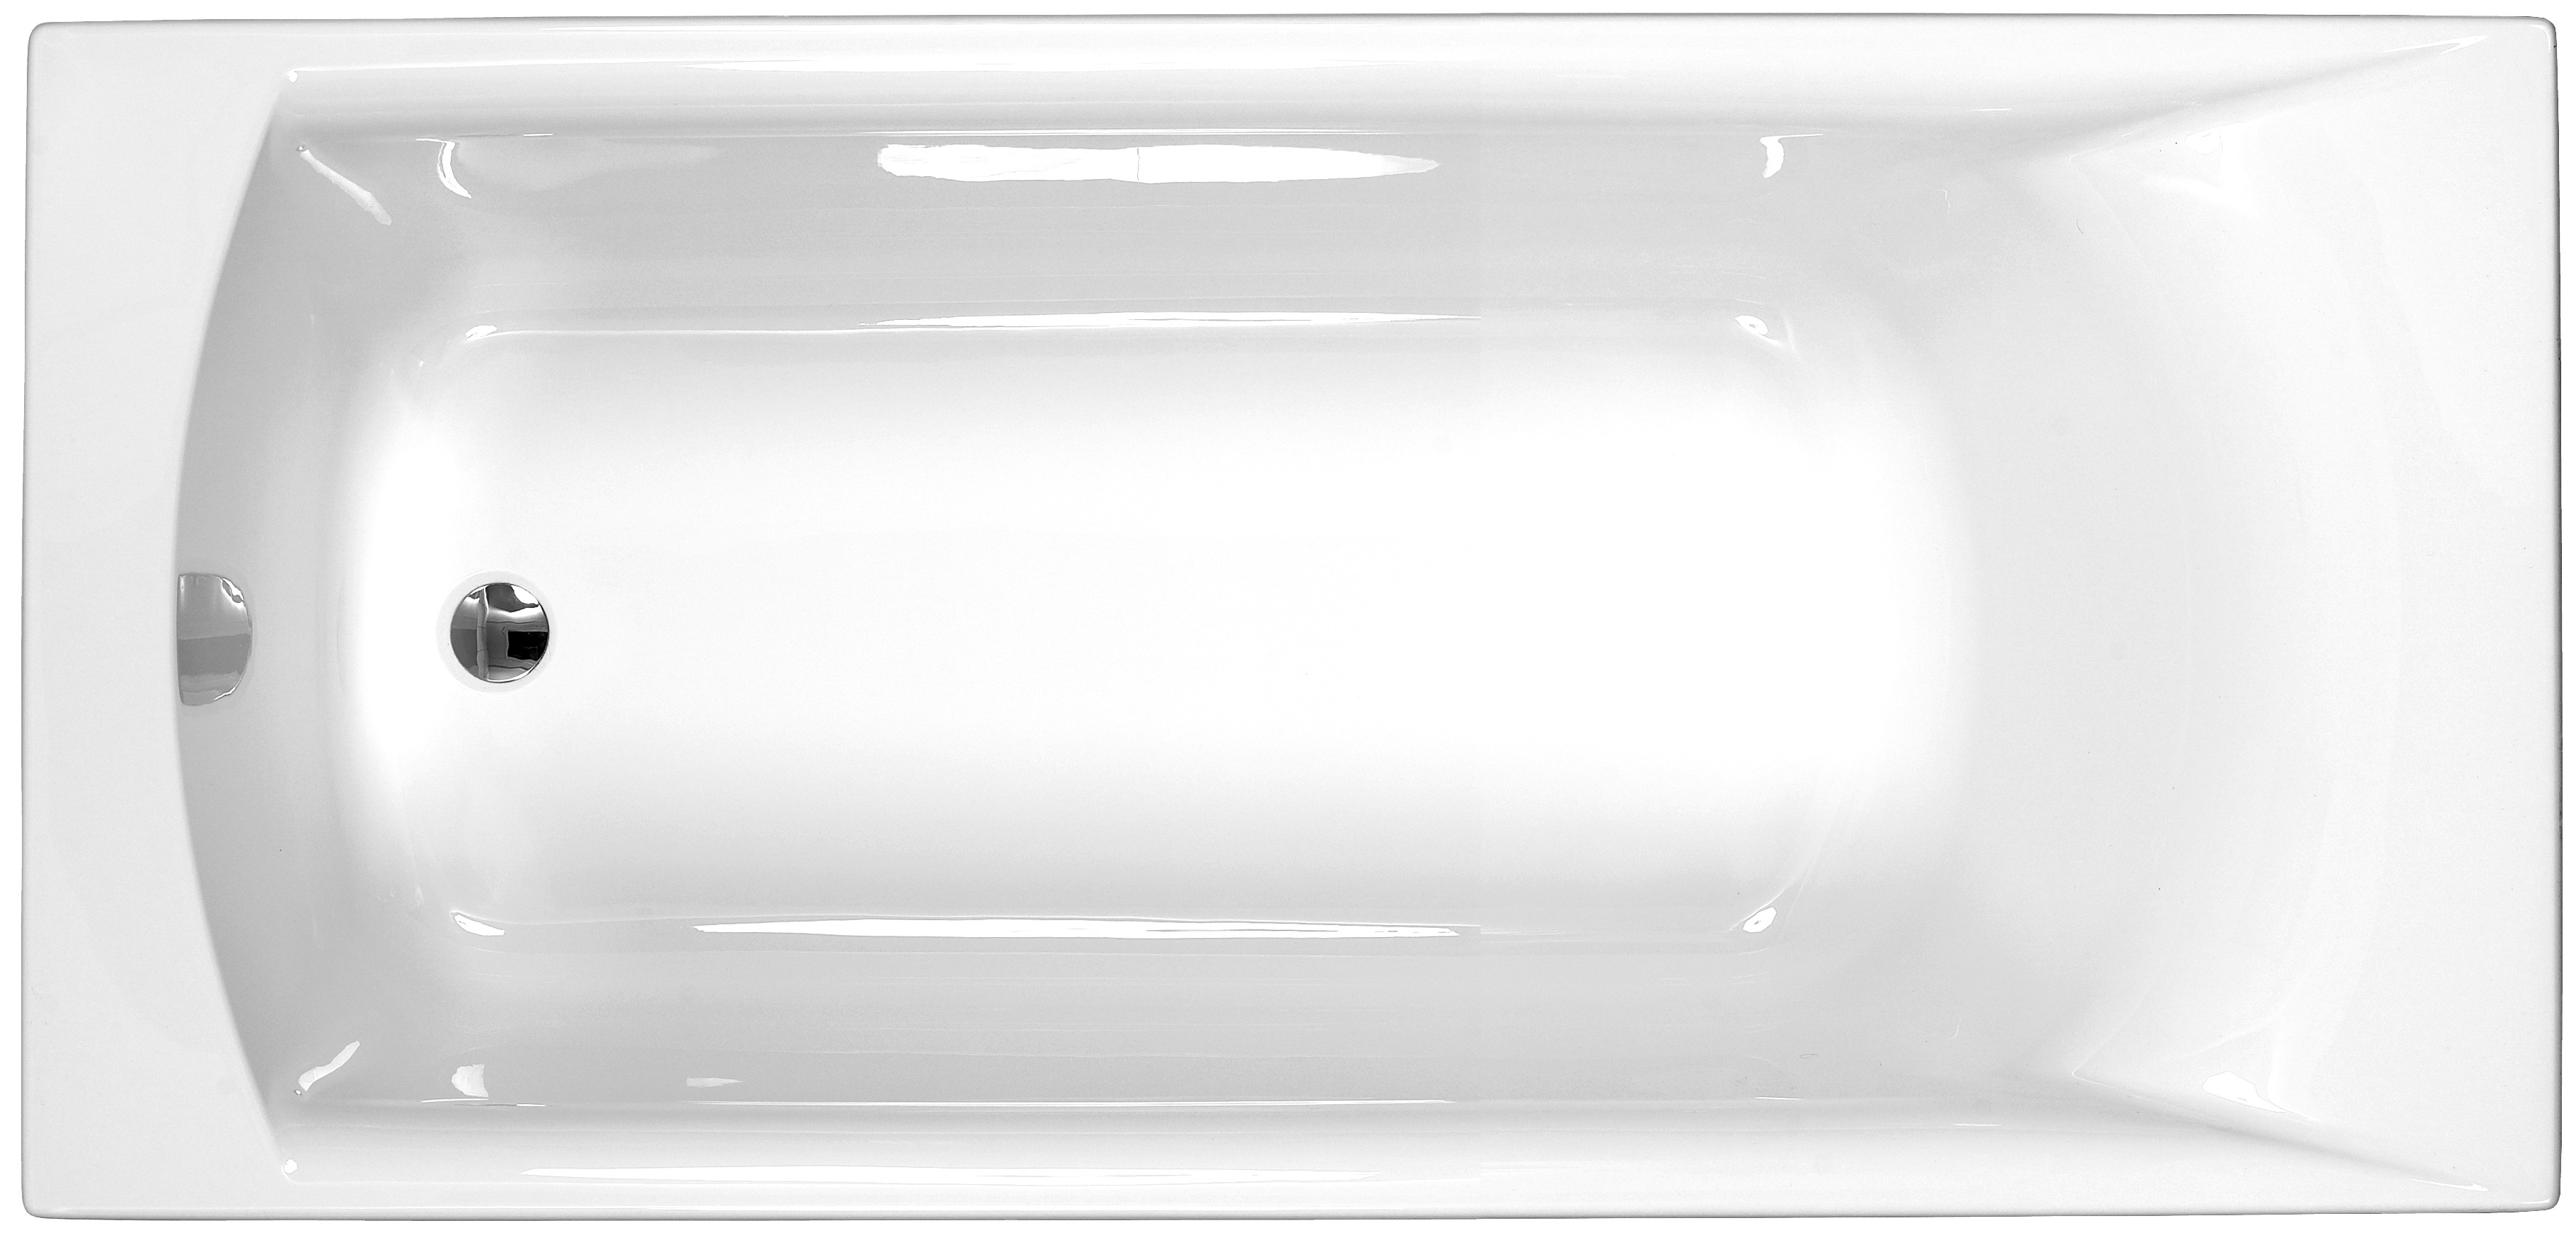 Carron Delta Single Ended No Tap Hole Carronite Bath with Front Bath Panel - Various Sizes